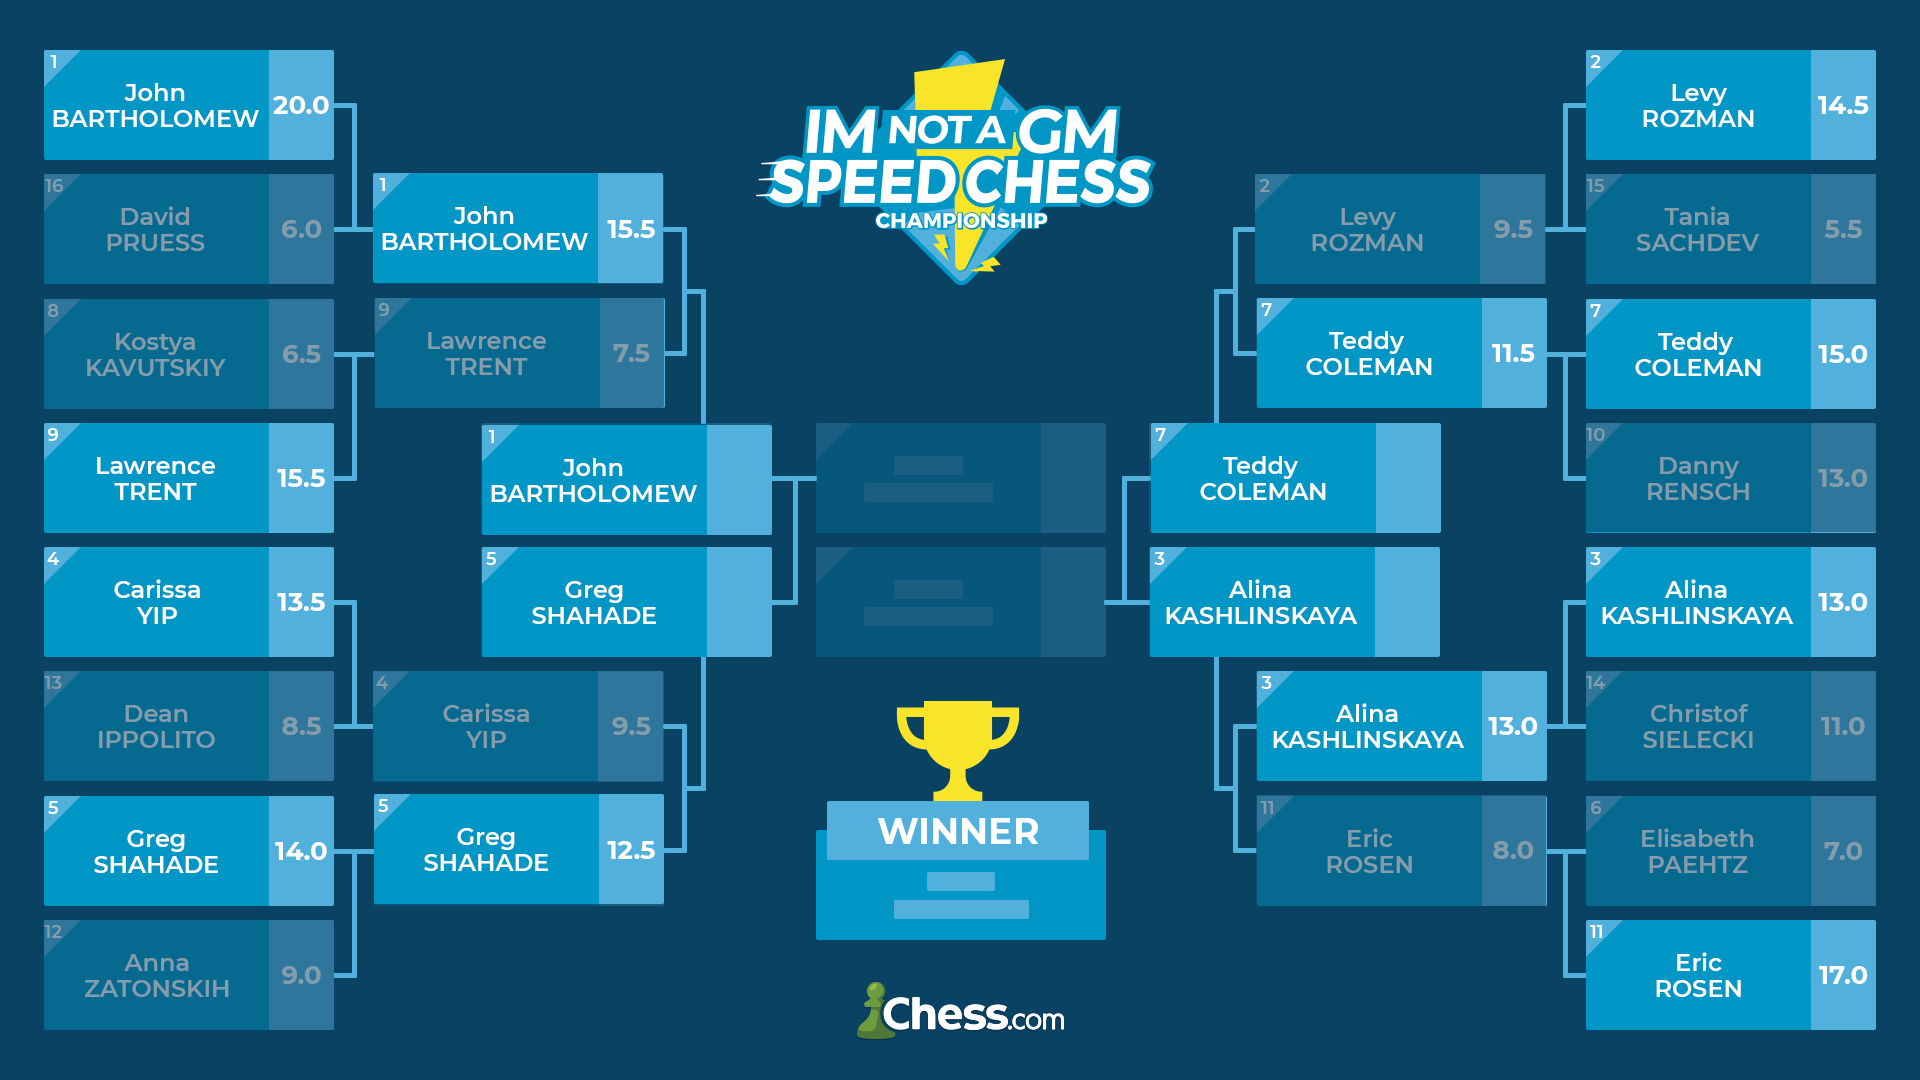 2020 Speed Chess Championship: All The Information 